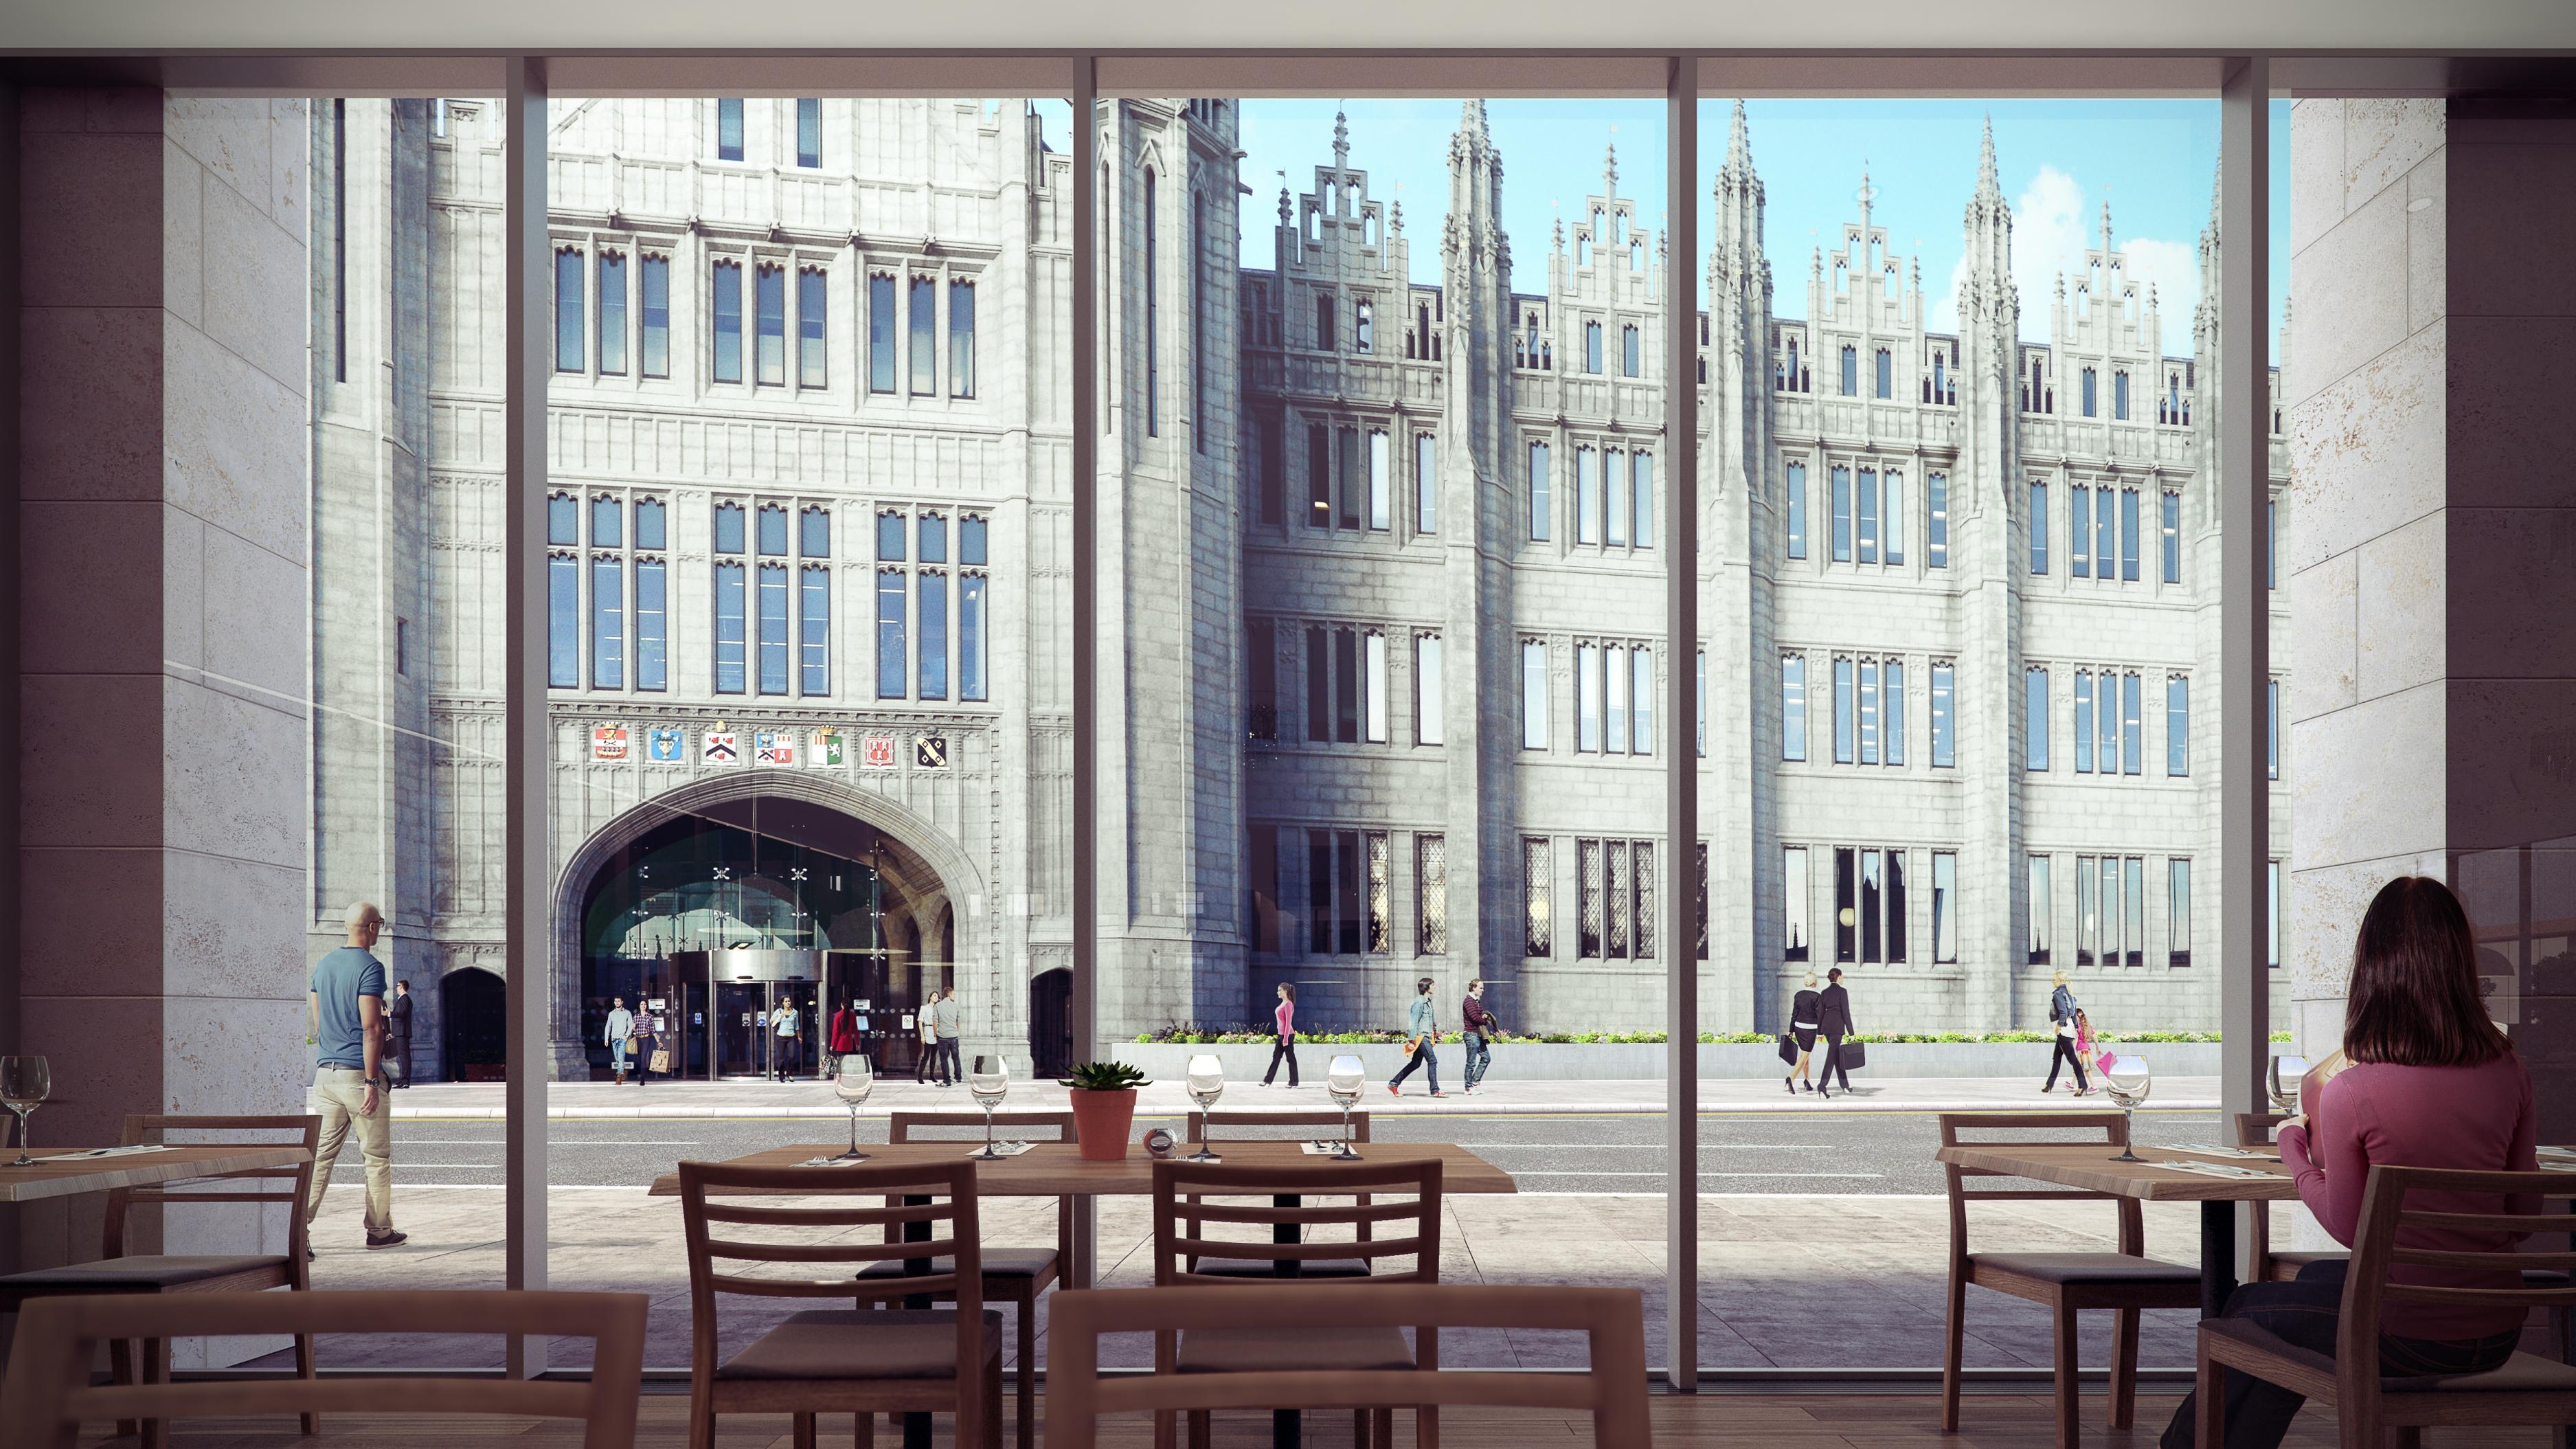 Artist's impressions of how Muse Development's Marischal Square plans might look